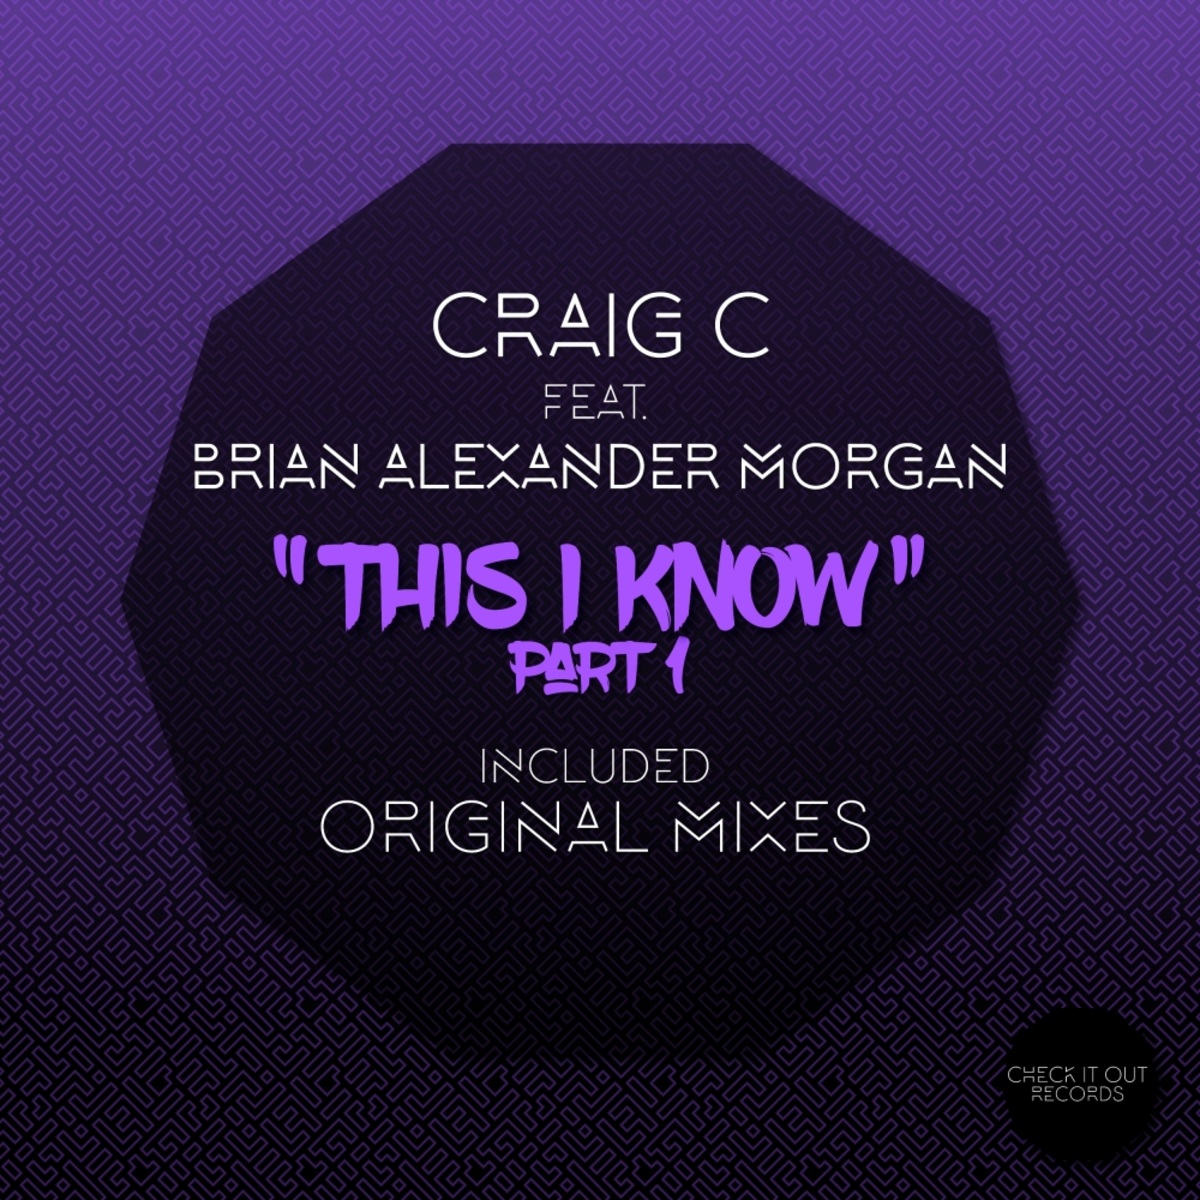 Craig C - This I Know / Check It Out Records